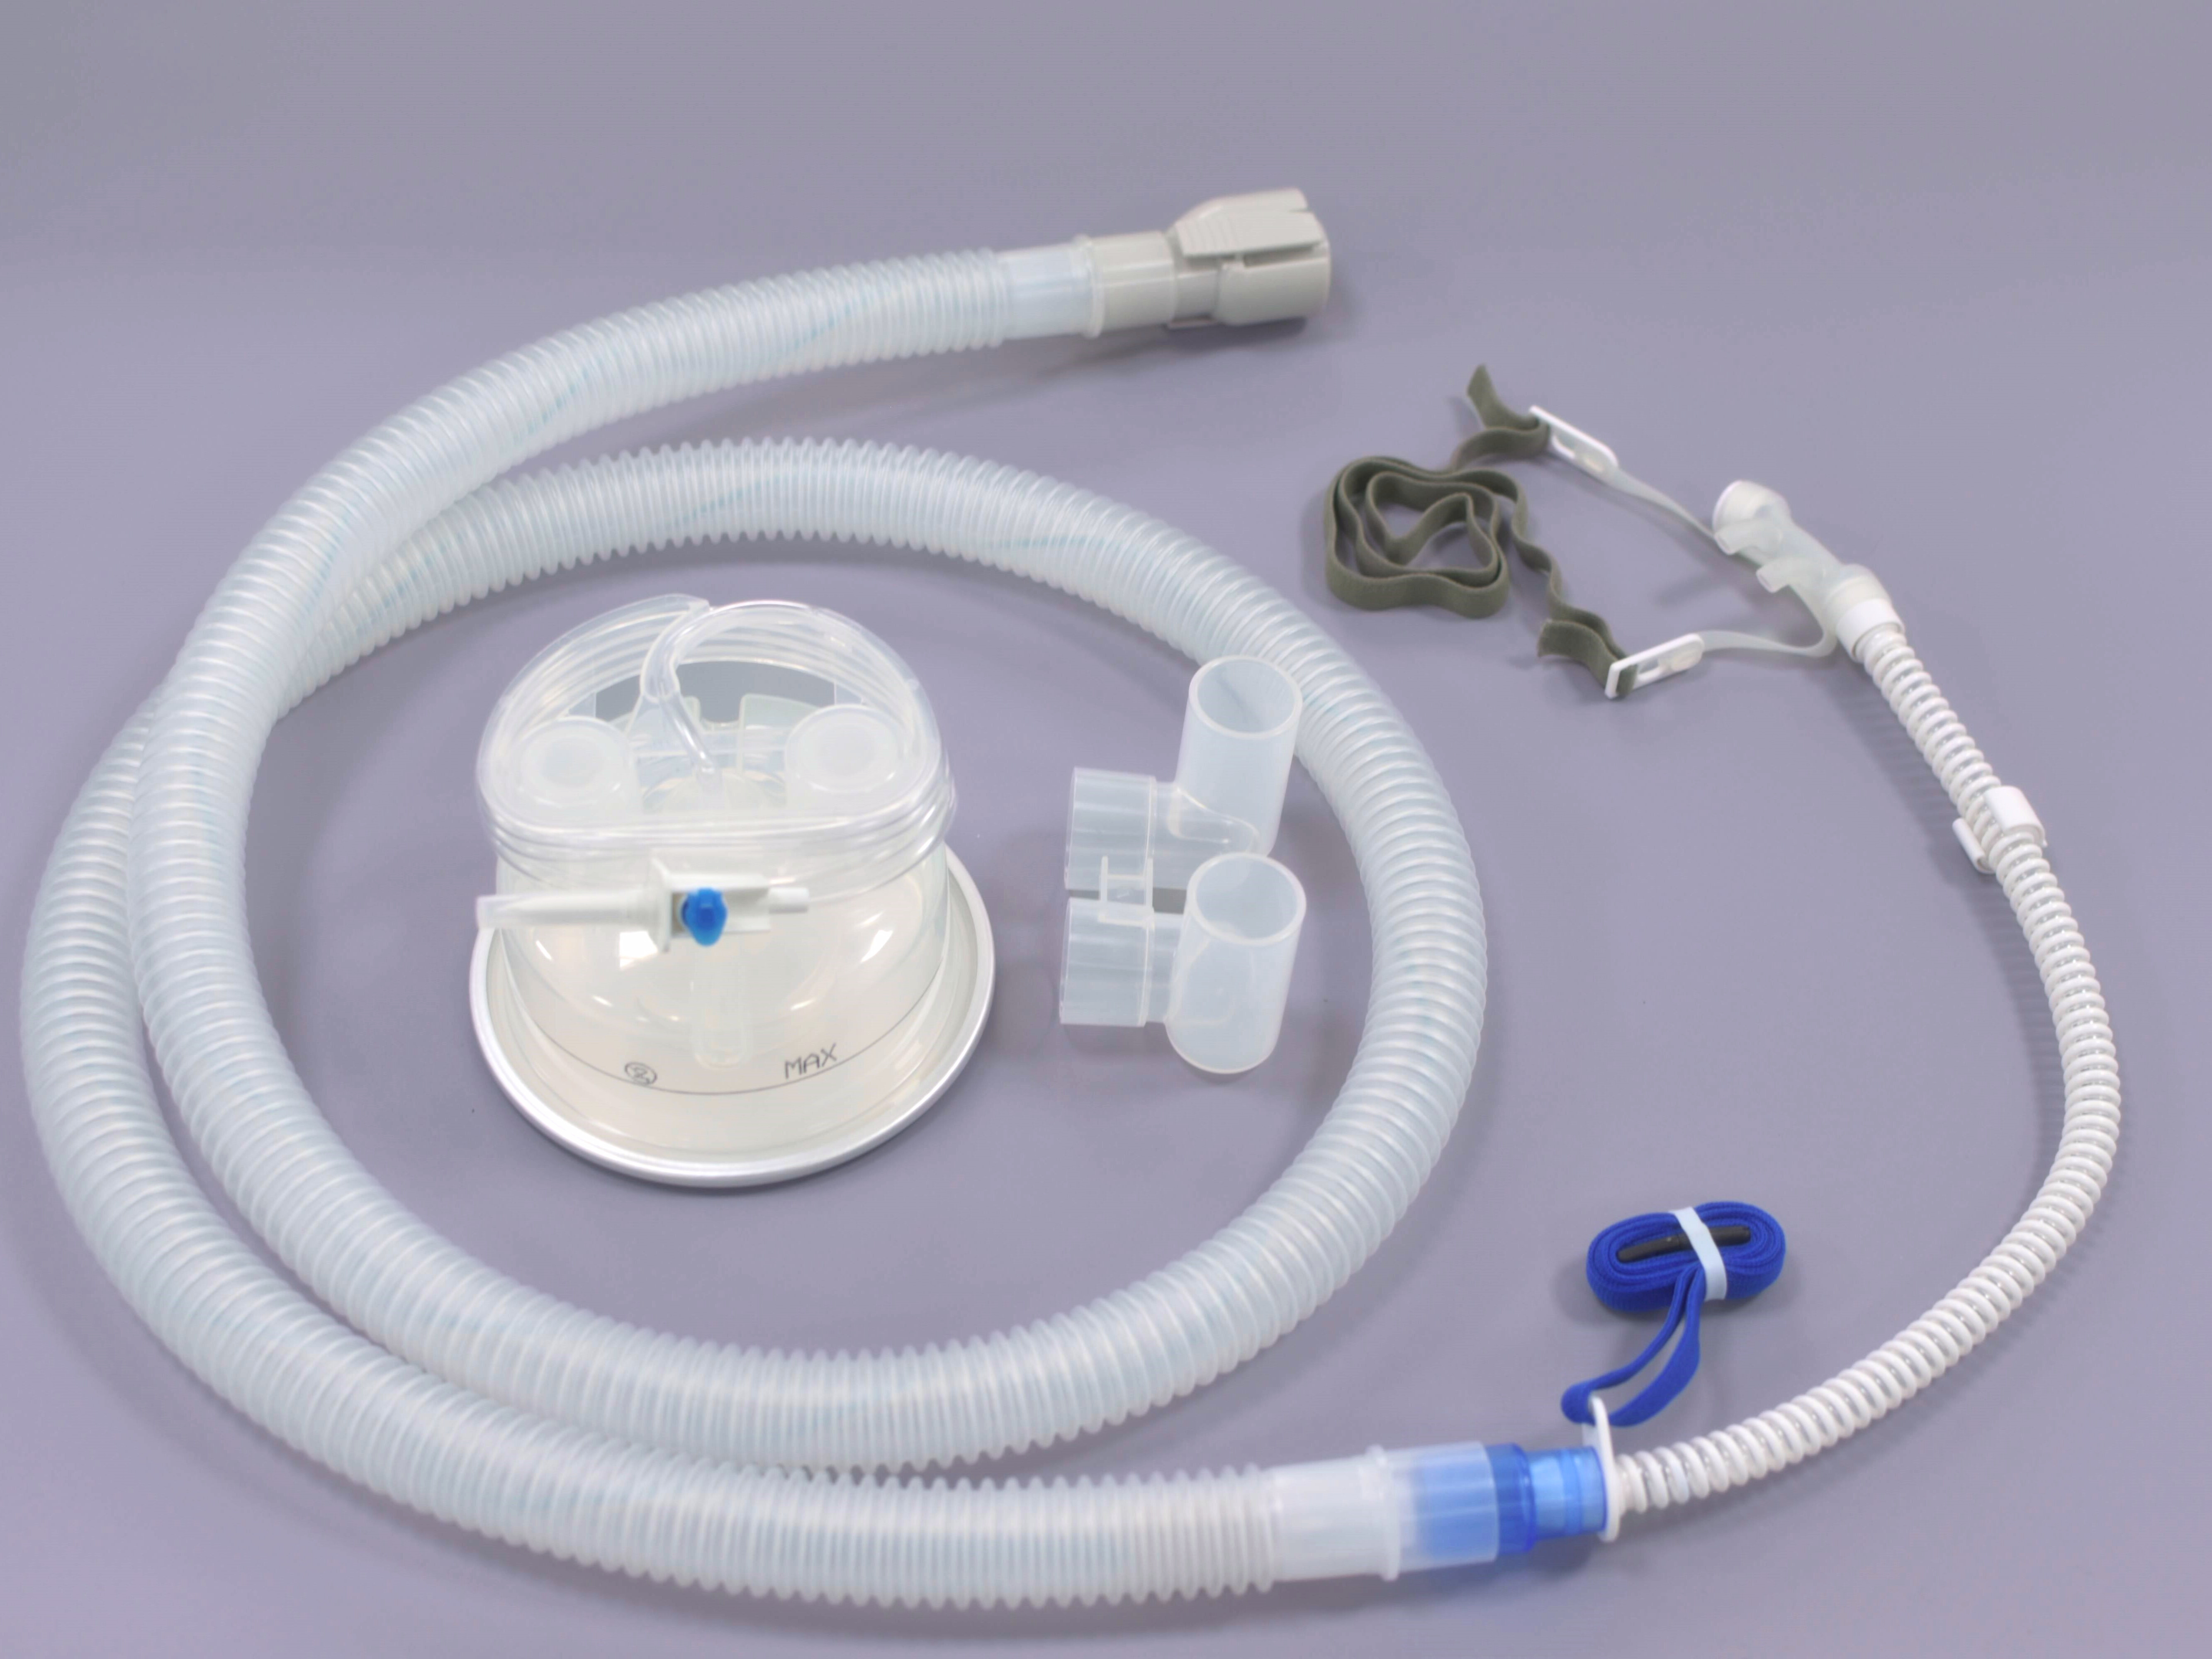 High flow oxygen therapy